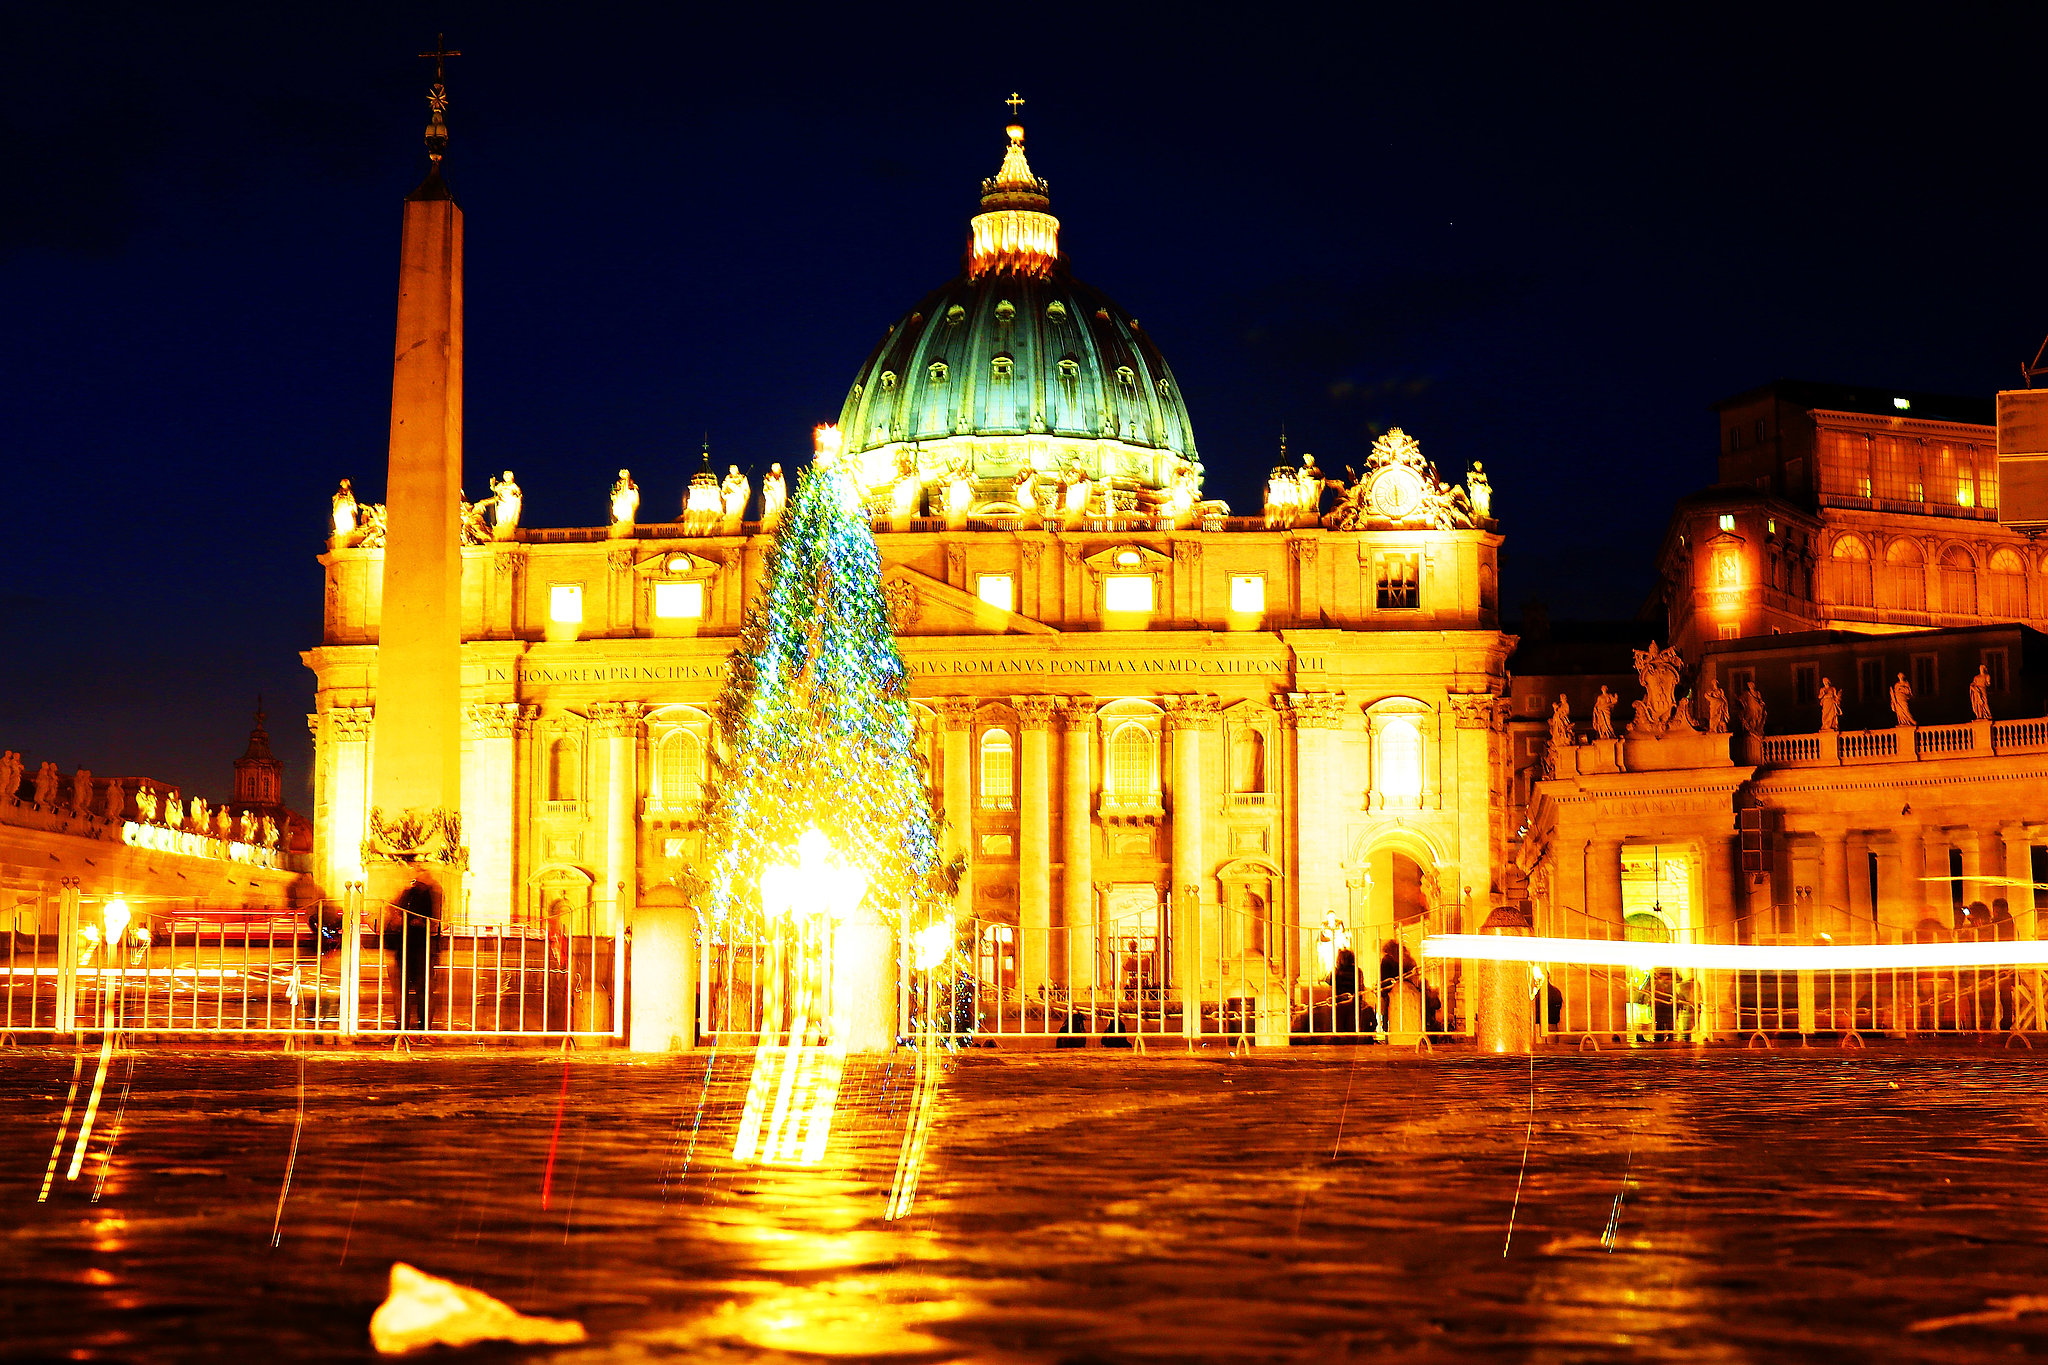 Vatican City was all aglow, with a giant Christmas tree on display in